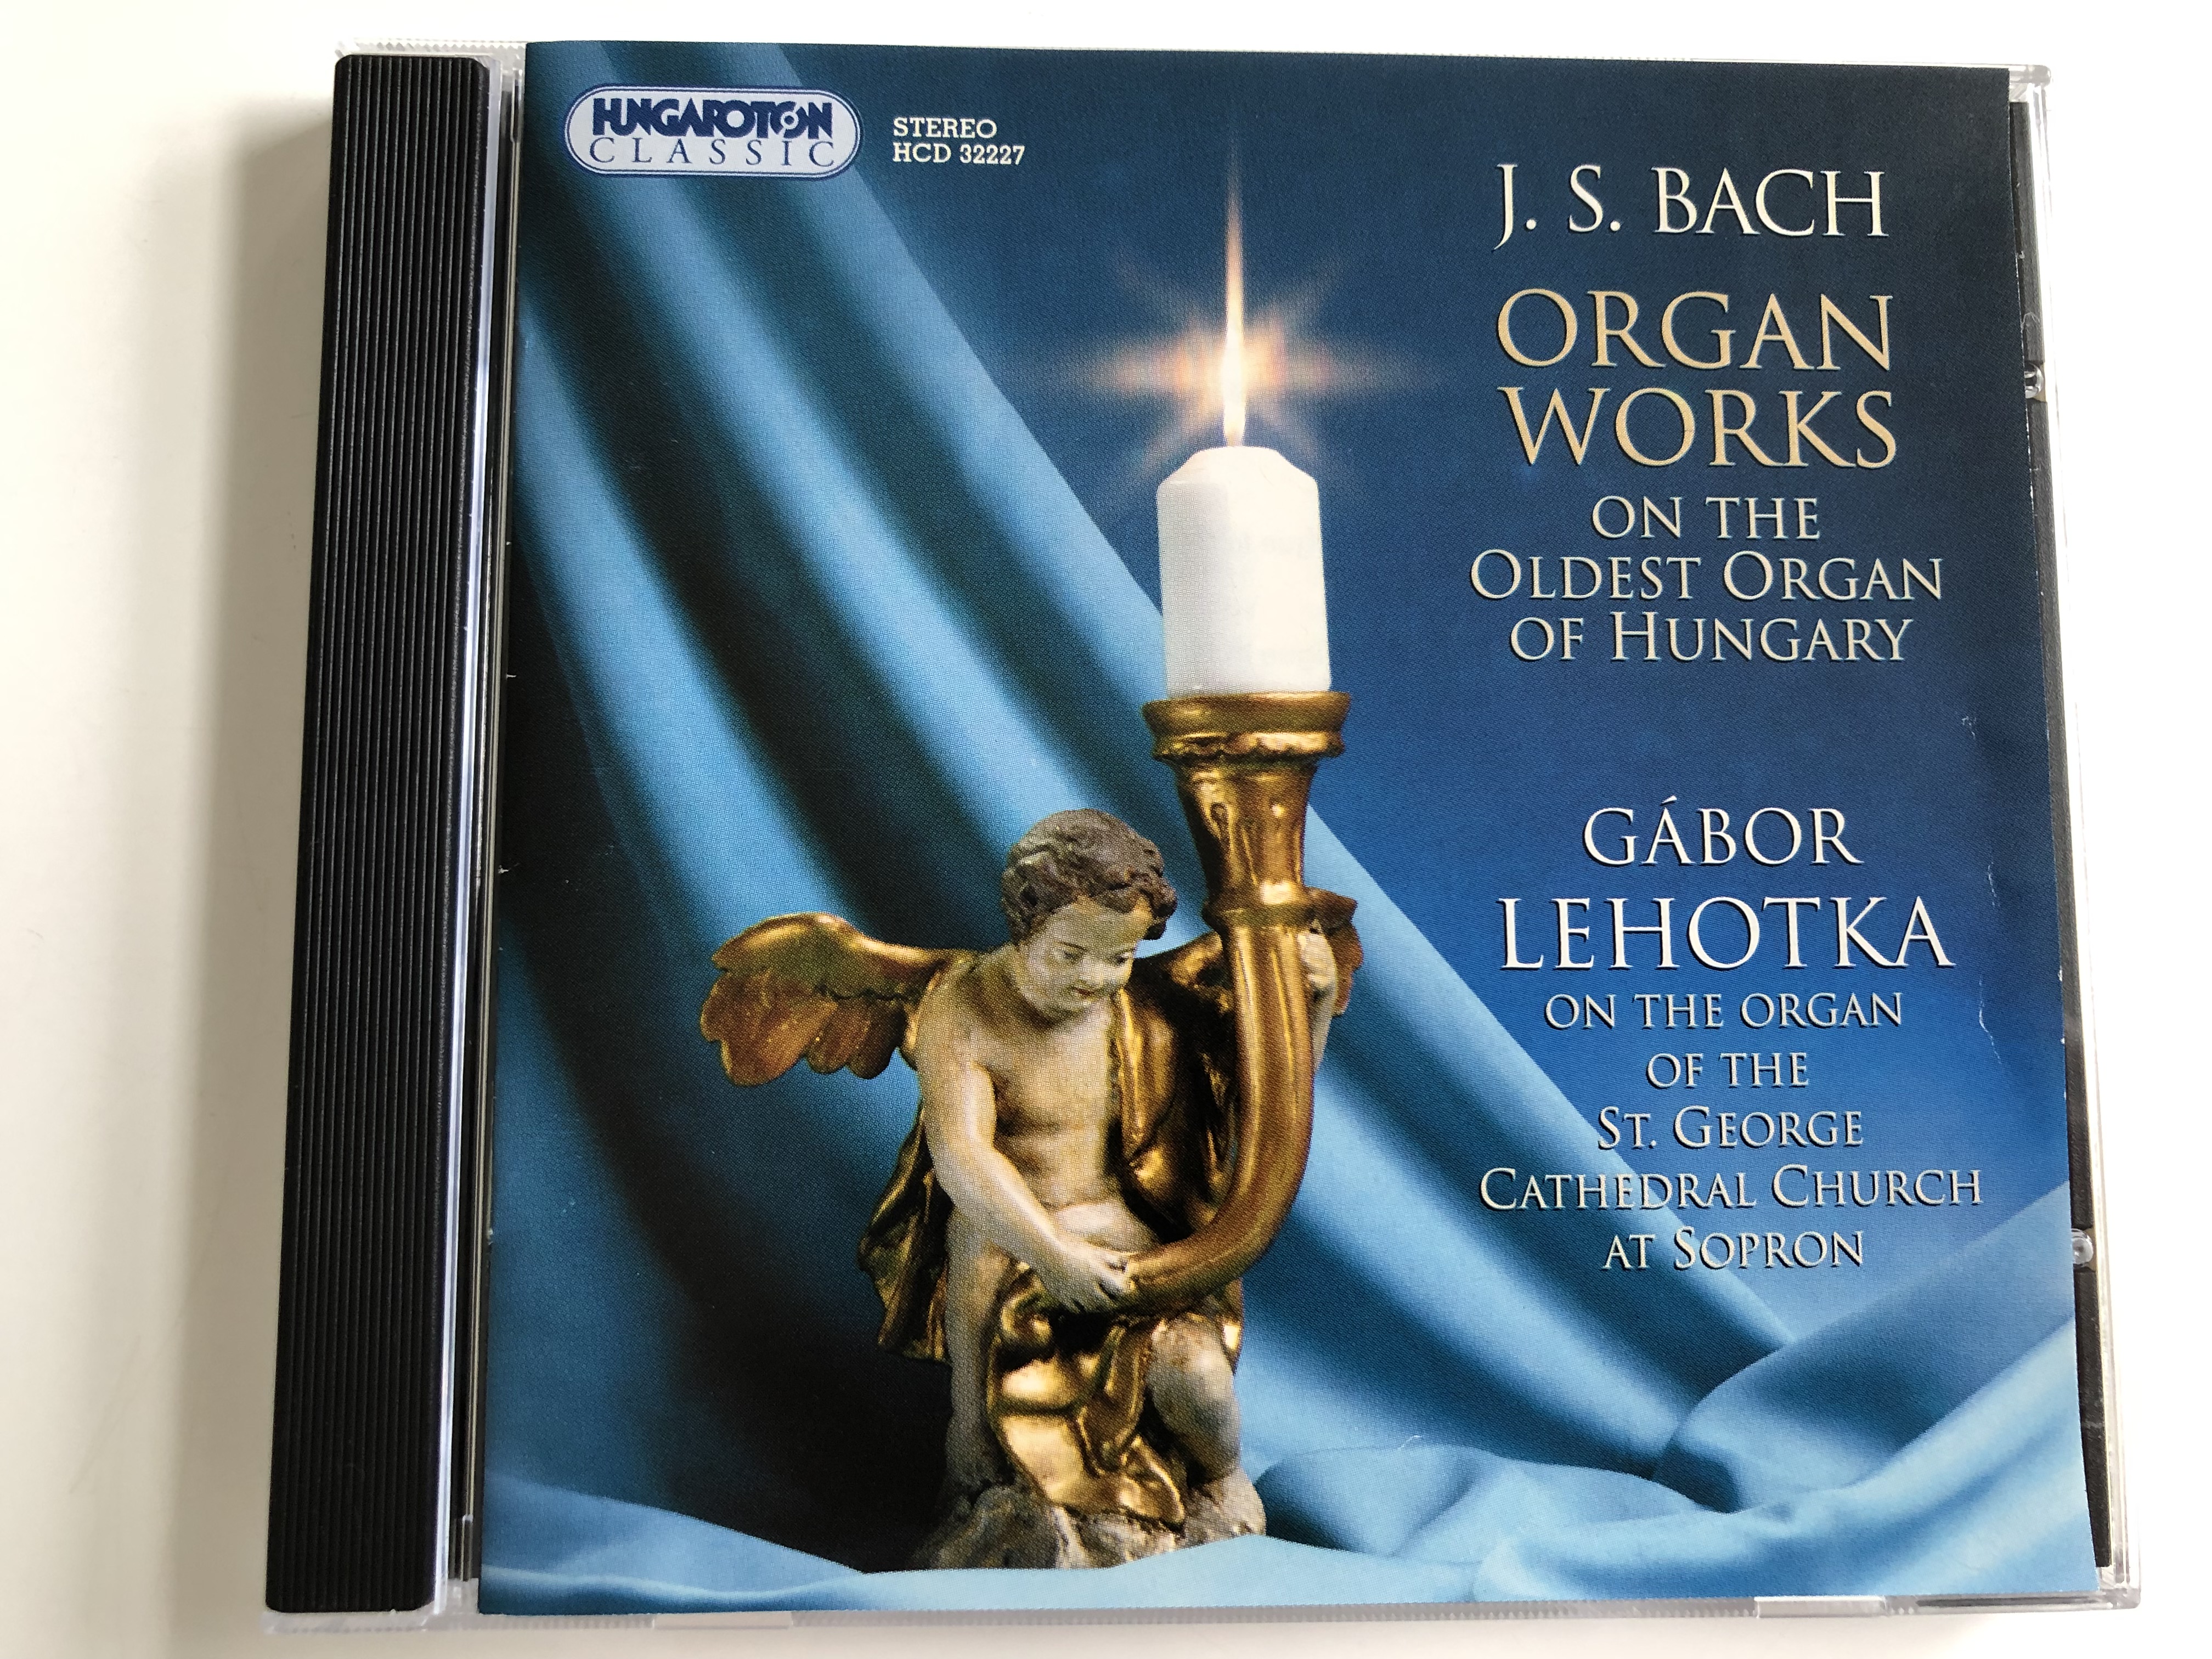 j.-s.-bach-organ-works-on-the-oldest-organ-of-hungary-gabor-lehotka-on-the-organ-of-the-st.-george-cathedral-chruch-at-sopron-hungaroton-audio-cd-1996-streo-hcd-32227-1-.jpg